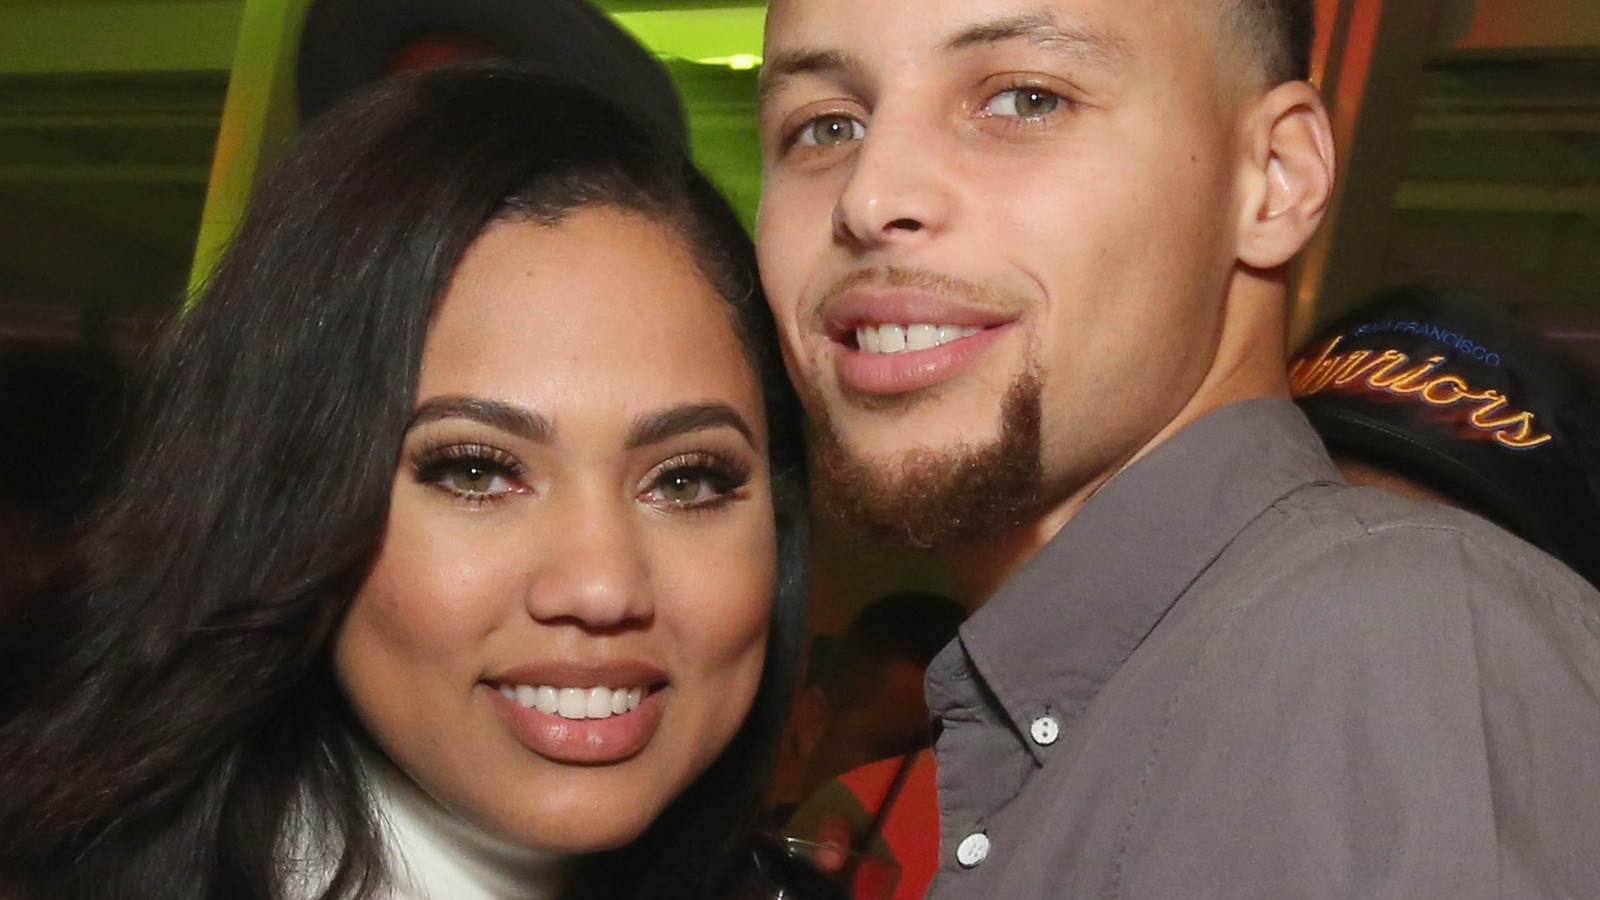 Steph Curry and wife, Ayesha, are expecting: 'Curry party of 5' - ABC News